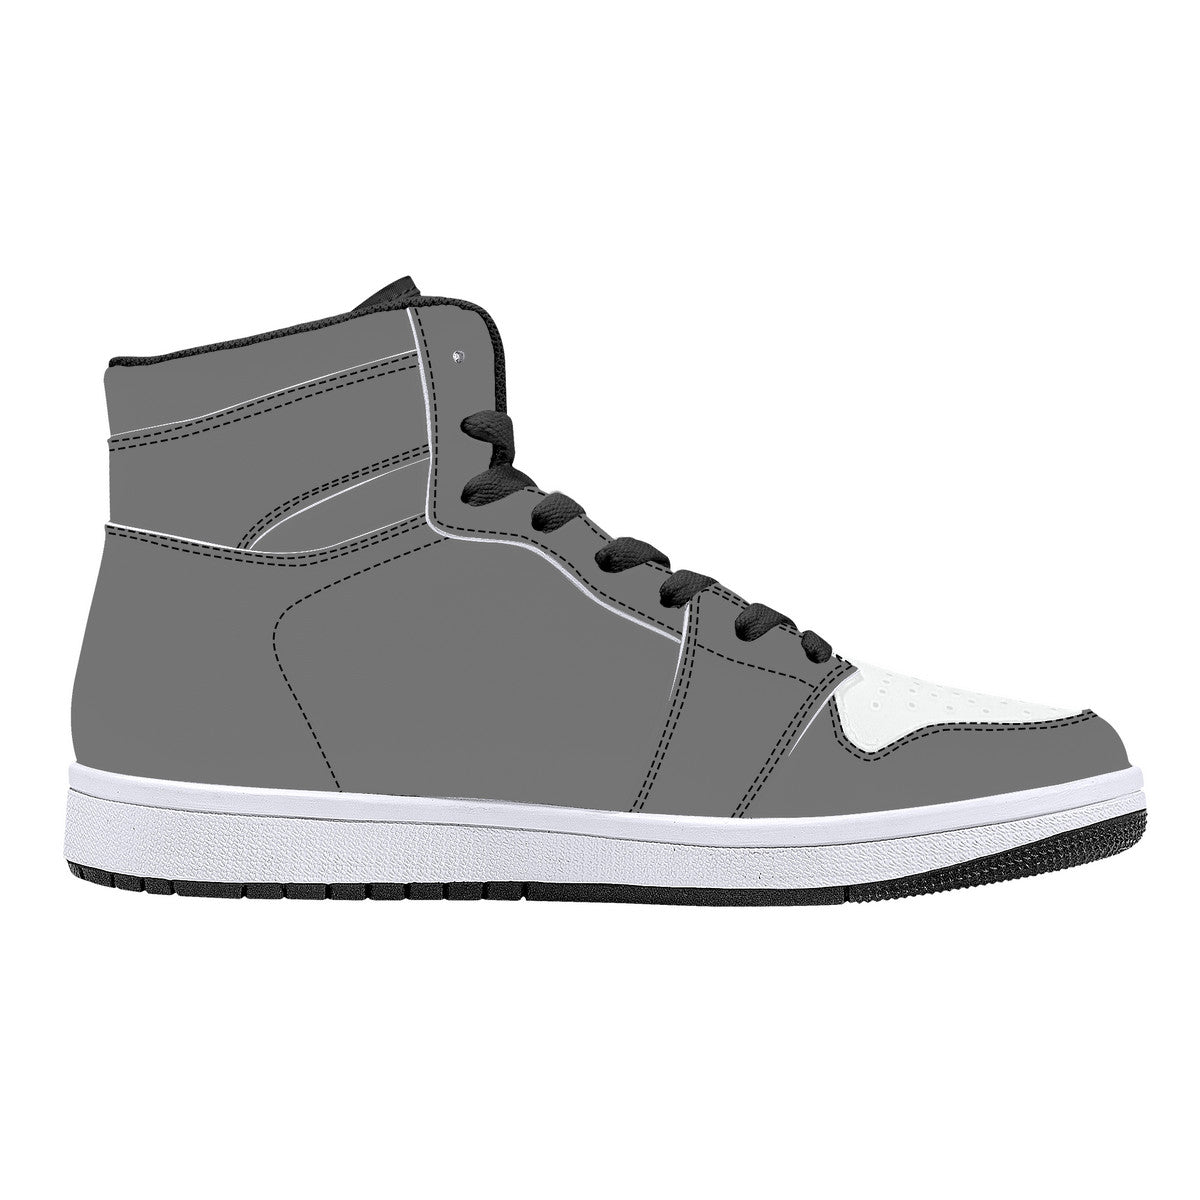 Create Your Own - High Top Synthetic Leather Sneakers - Black - HayGoodies